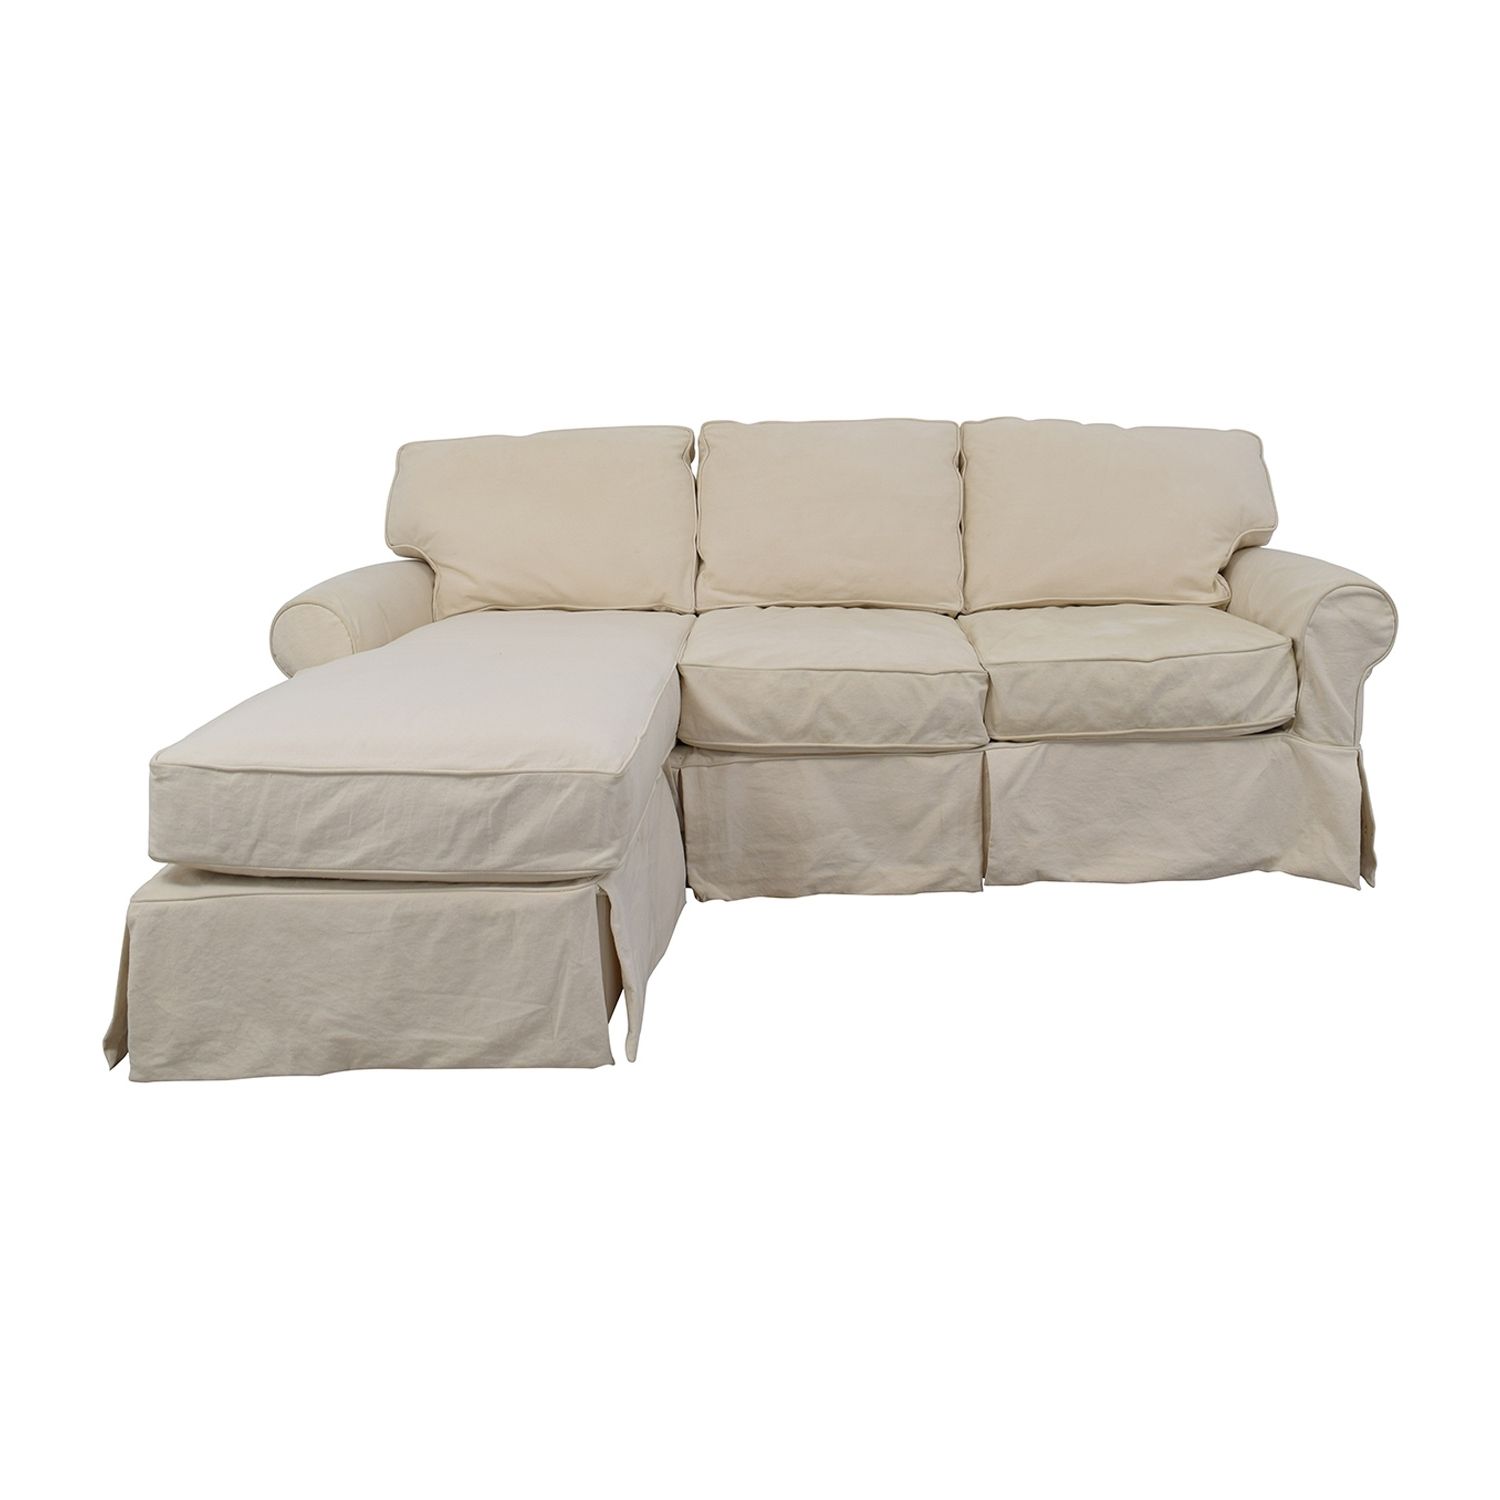 [%90% Off – Home Decorators Collection Home Decorators Collection Throughout Well Liked White Sectional Sofas With Chaise|white Sectional Sofas With Chaise Throughout Fashionable 90% Off – Home Decorators Collection Home Decorators Collection|preferred White Sectional Sofas With Chaise With 90% Off – Home Decorators Collection Home Decorators Collection|most Popular 90% Off – Home Decorators Collection Home Decorators Collection Intended For White Sectional Sofas With Chaise%] (View 13 of 15)